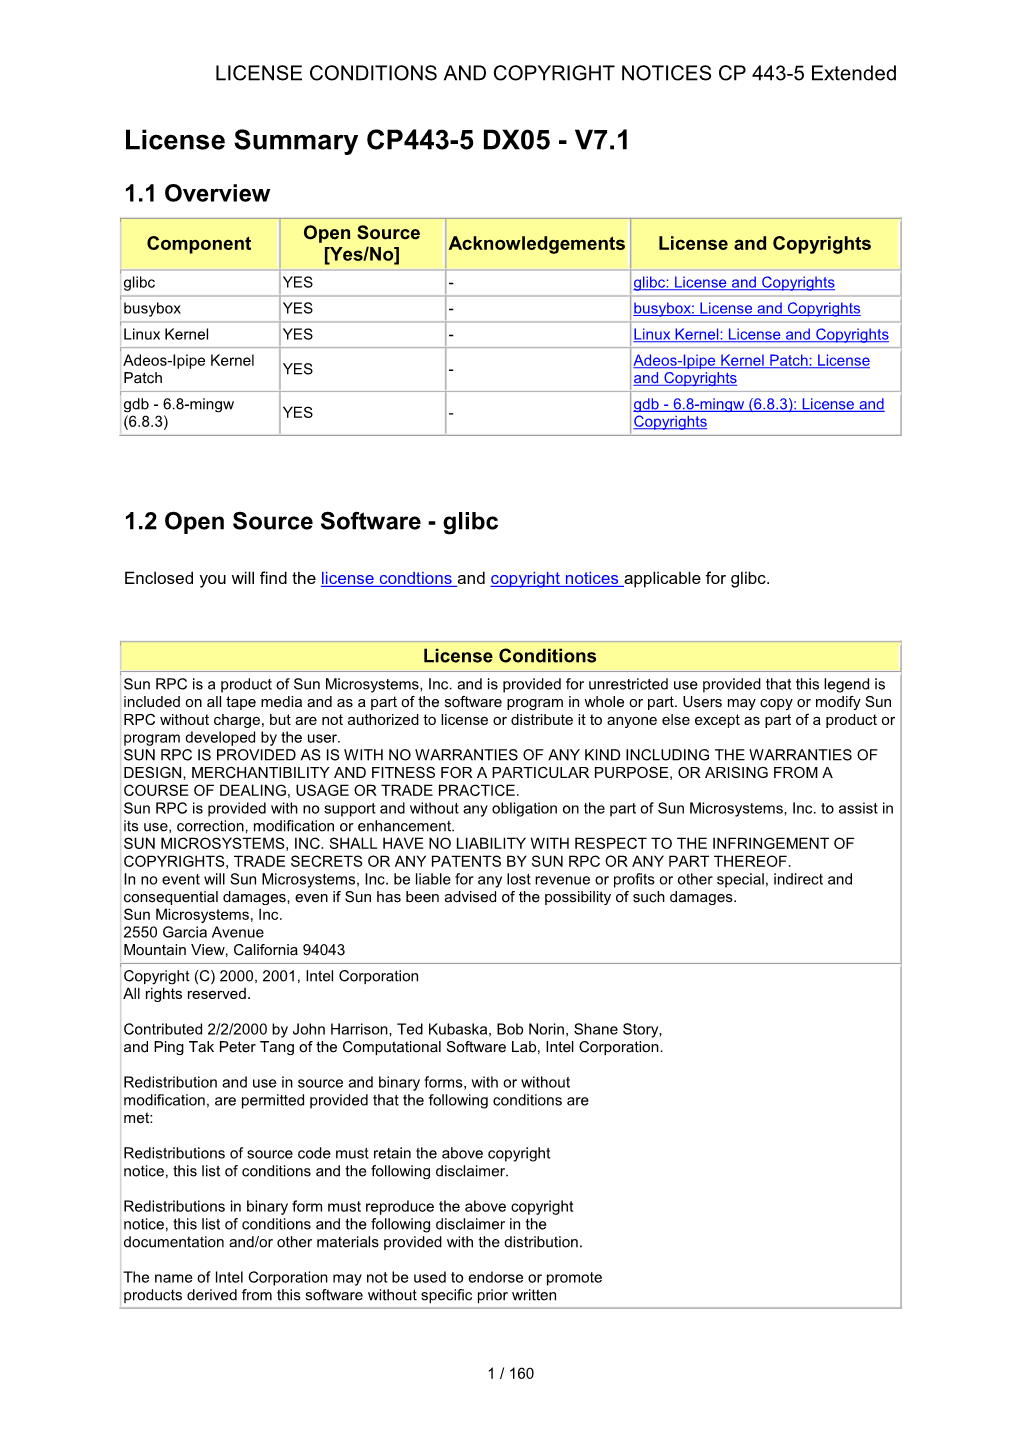 Open Source Software License Summary CP 443-5 Extended